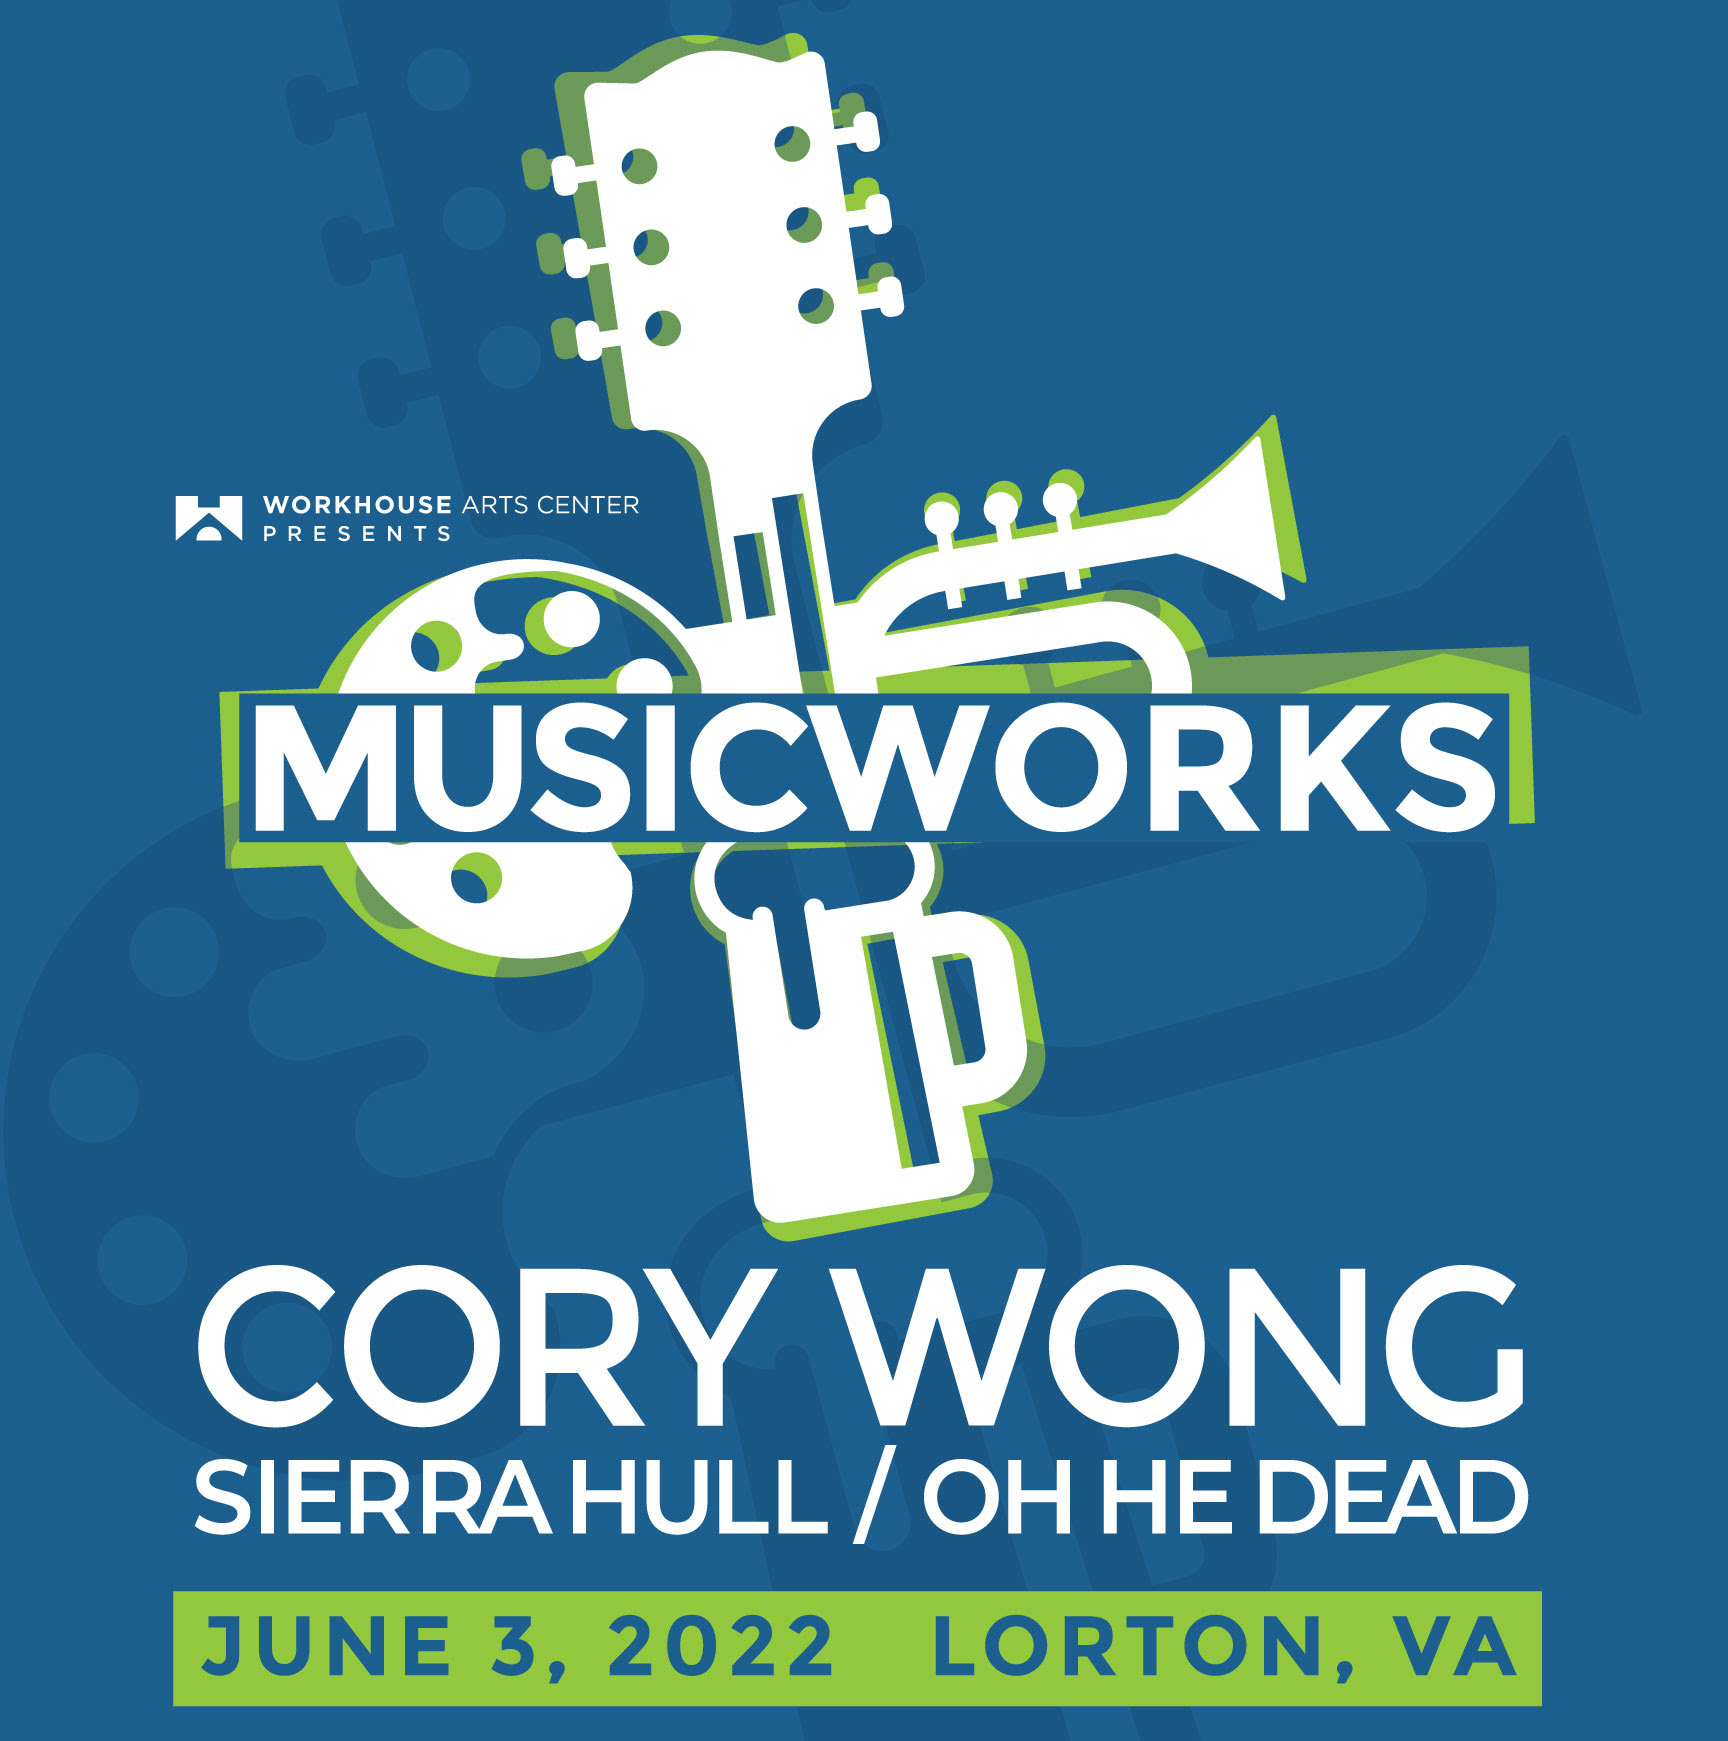 WORKHOUSE ARTS FOUNDATION Announces Inaugural MUSICWORKS Event Featuring CORY WONG, SIERRA HULL, and OH HE DEAD Friday, June 3, 2022